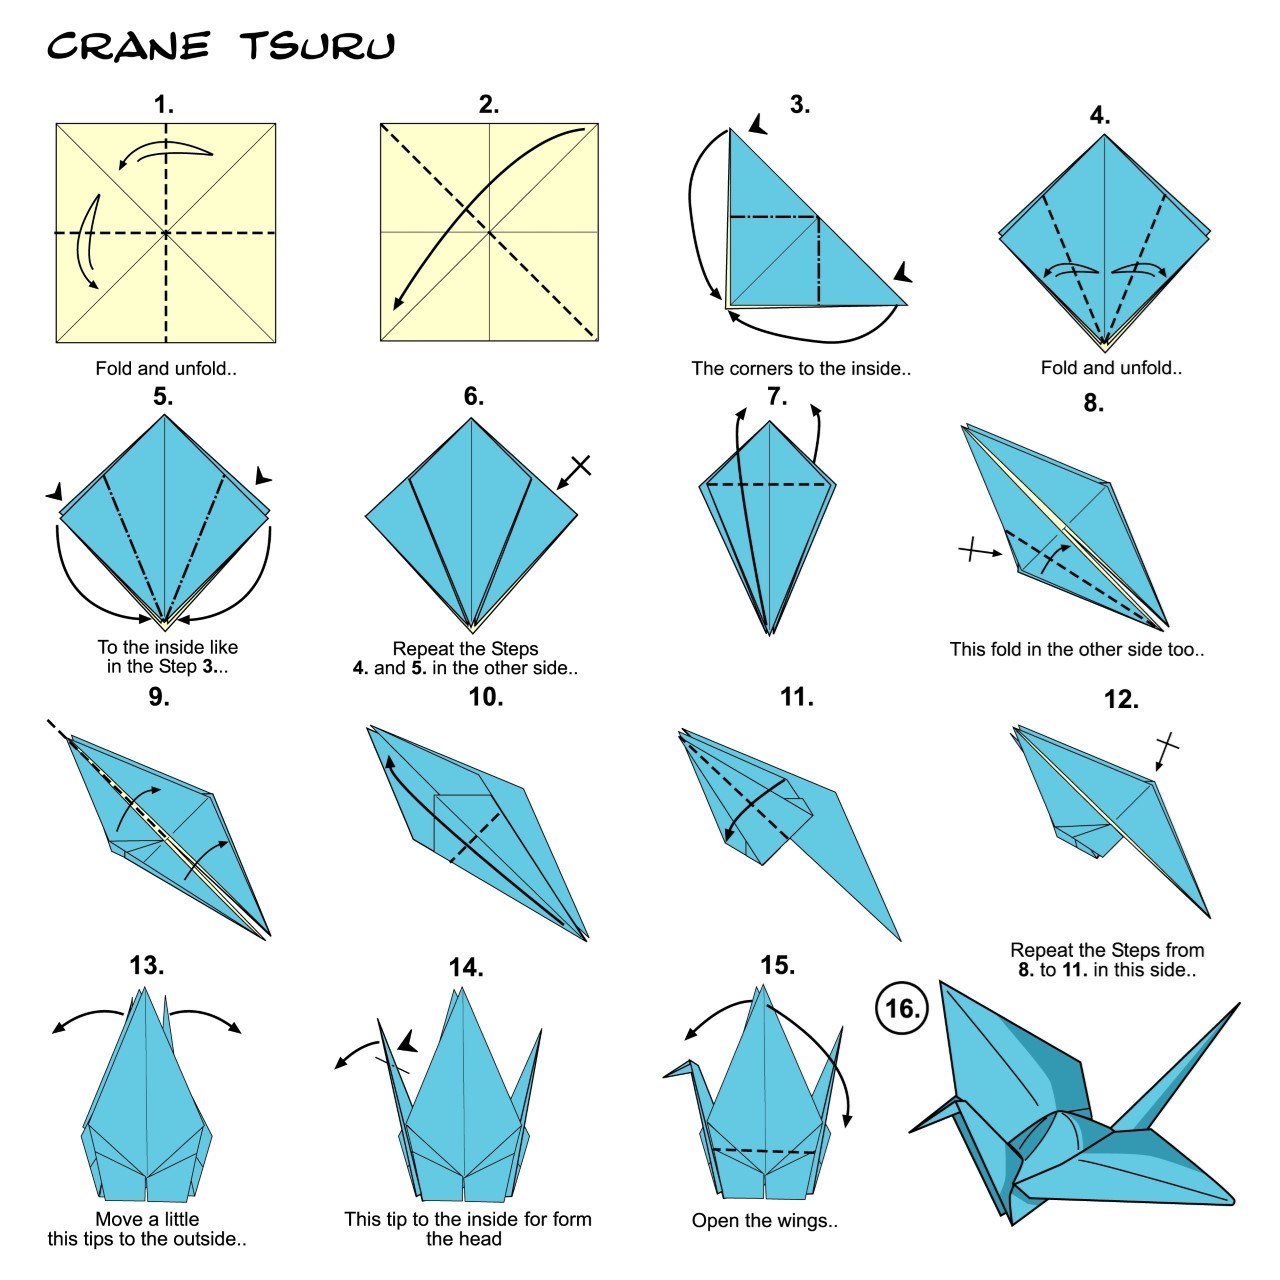 A 16-step diagram on how to fold an origami crane.